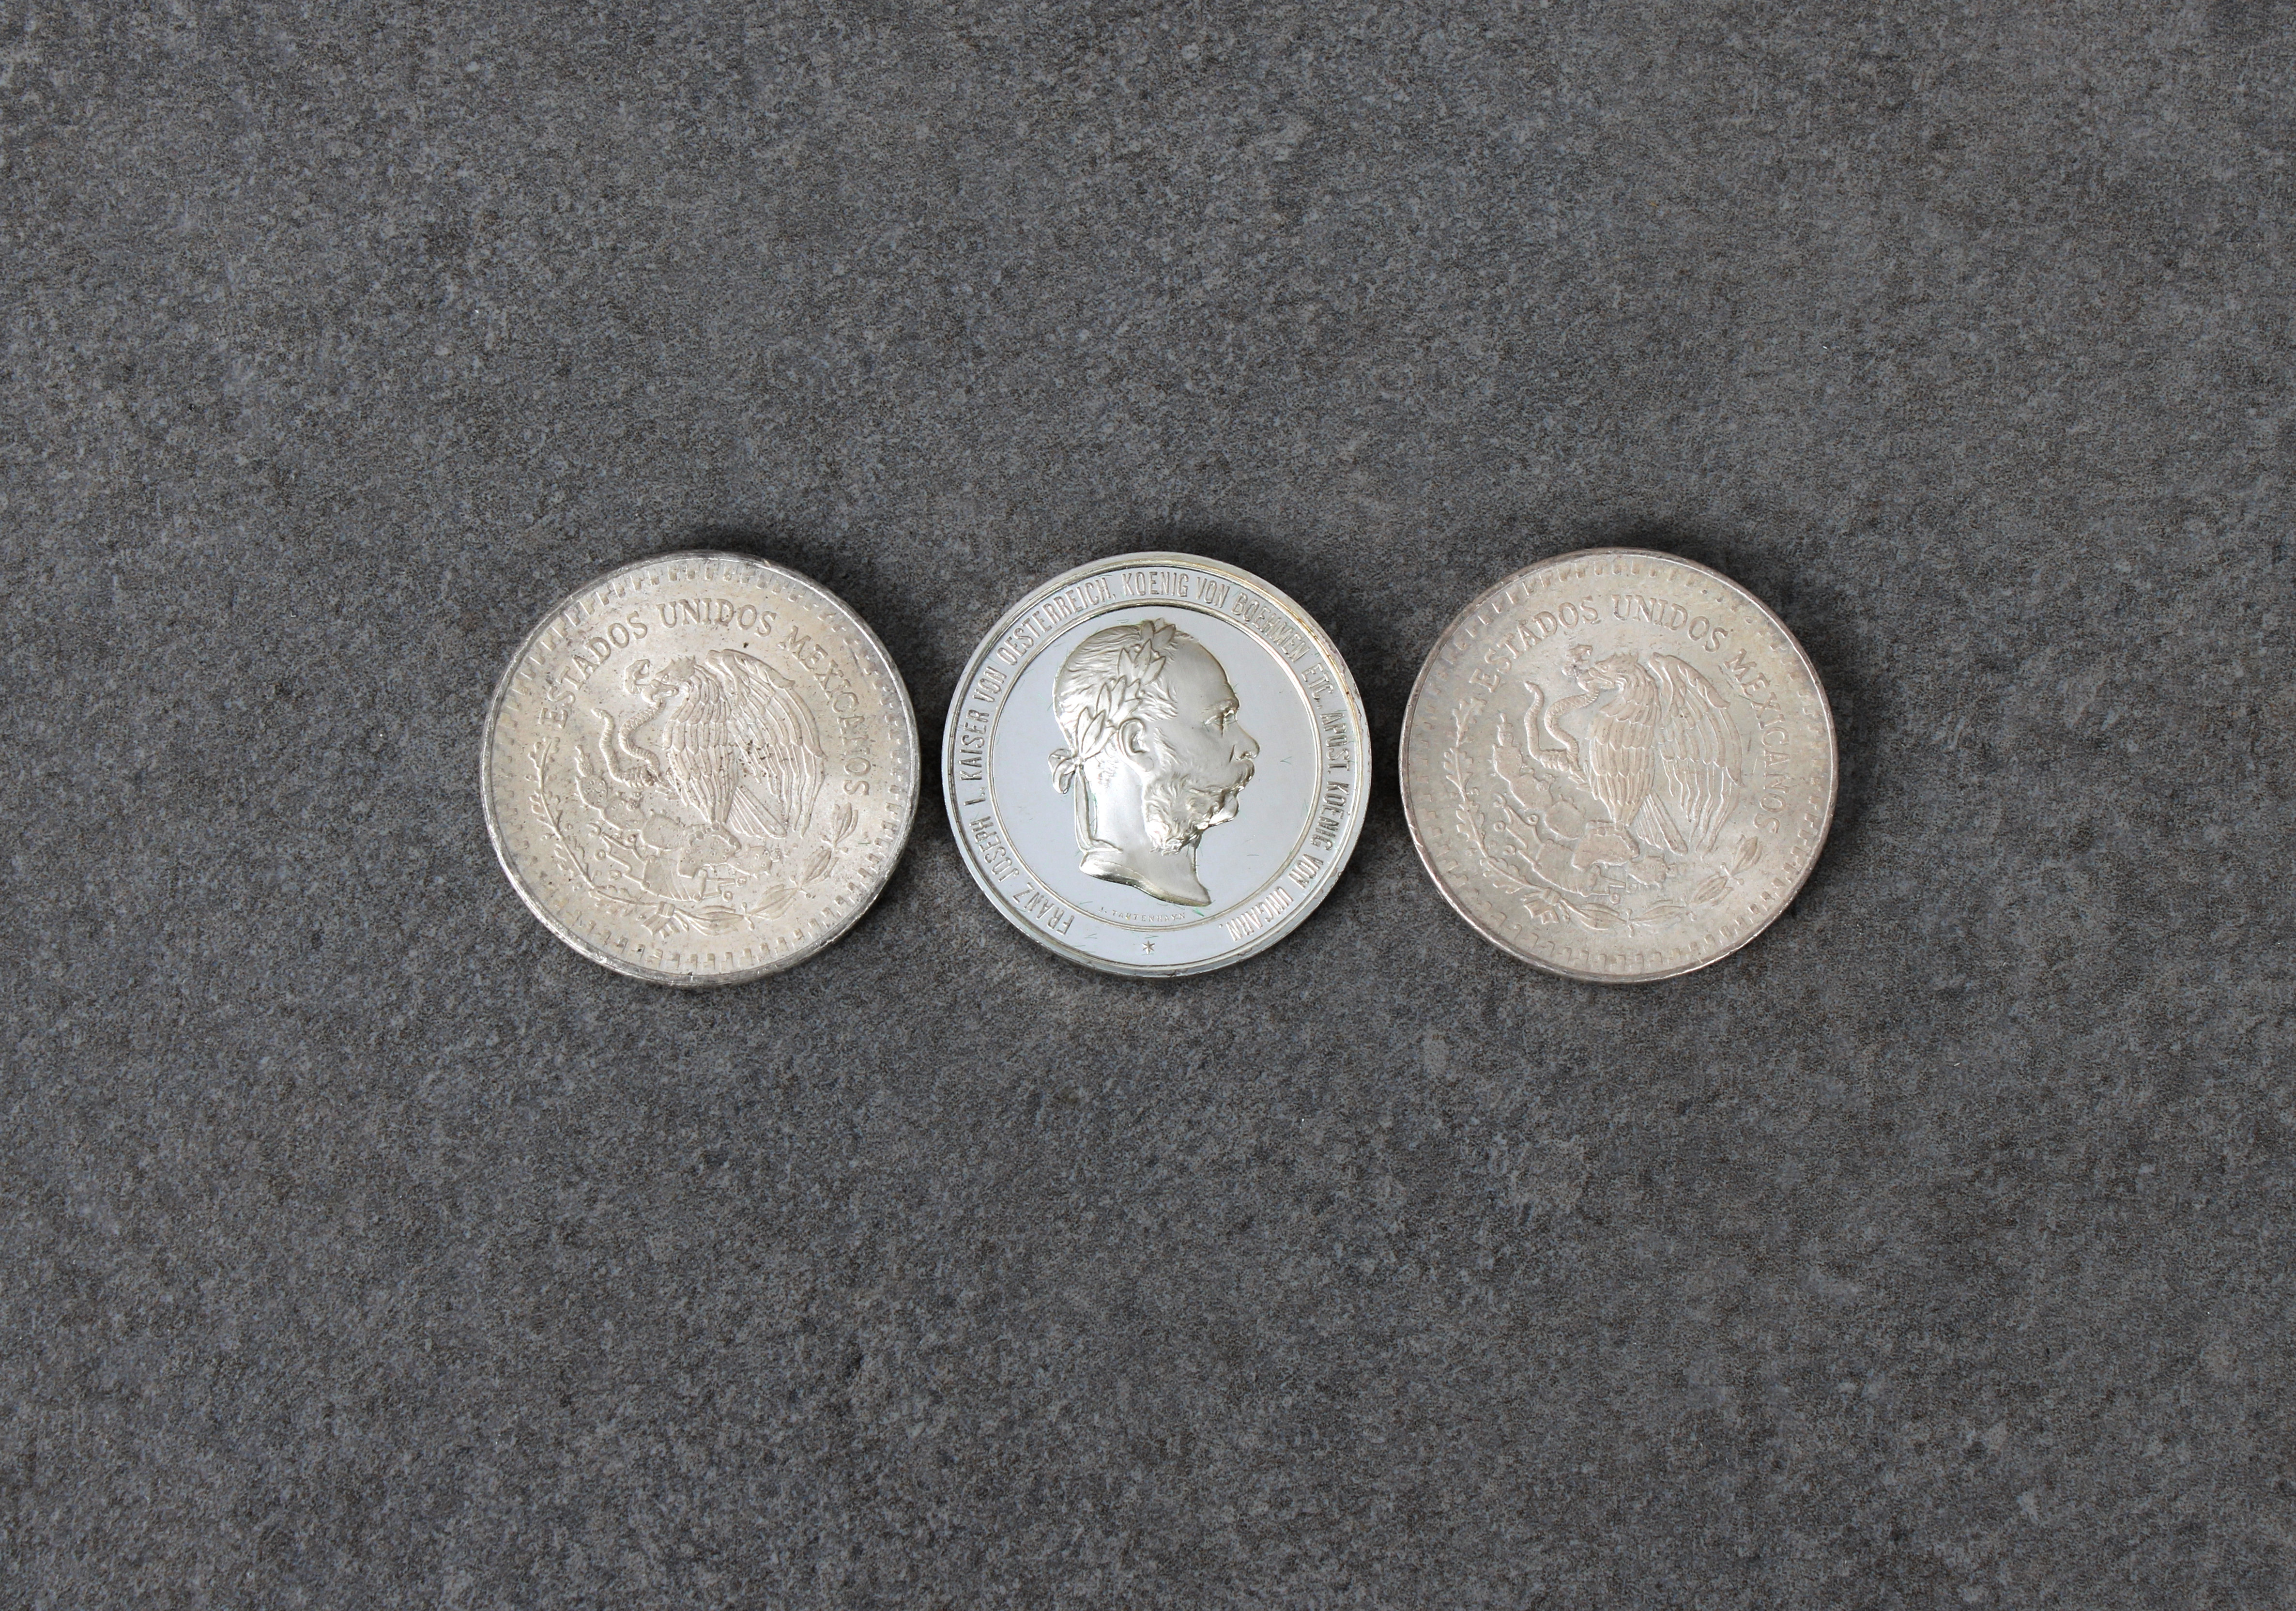 A 1 Onza "Libertad" coins 1983 & 1985 .999 silver - Image 2 of 2